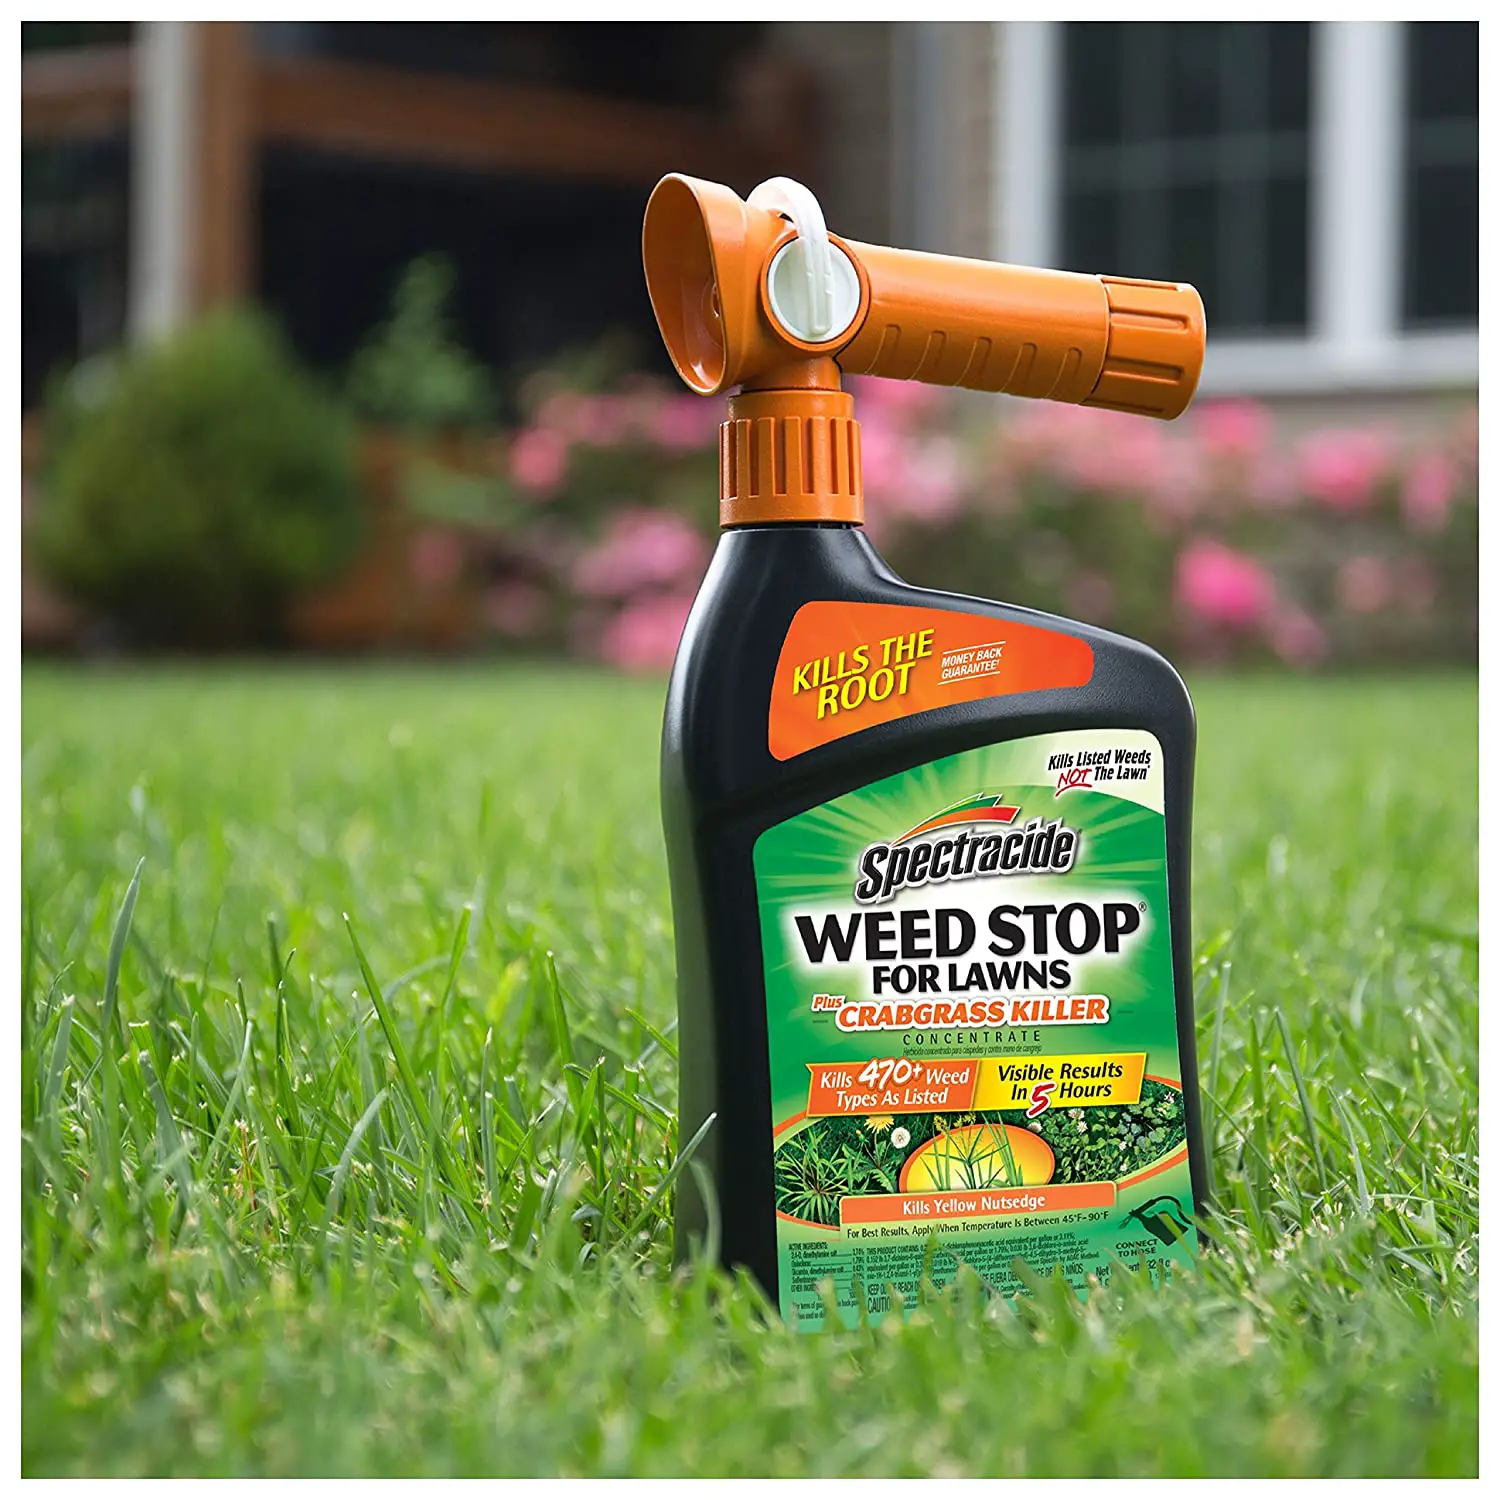 Weed Stop For Lawns Plus Crabgrass Killer Concentrate ...